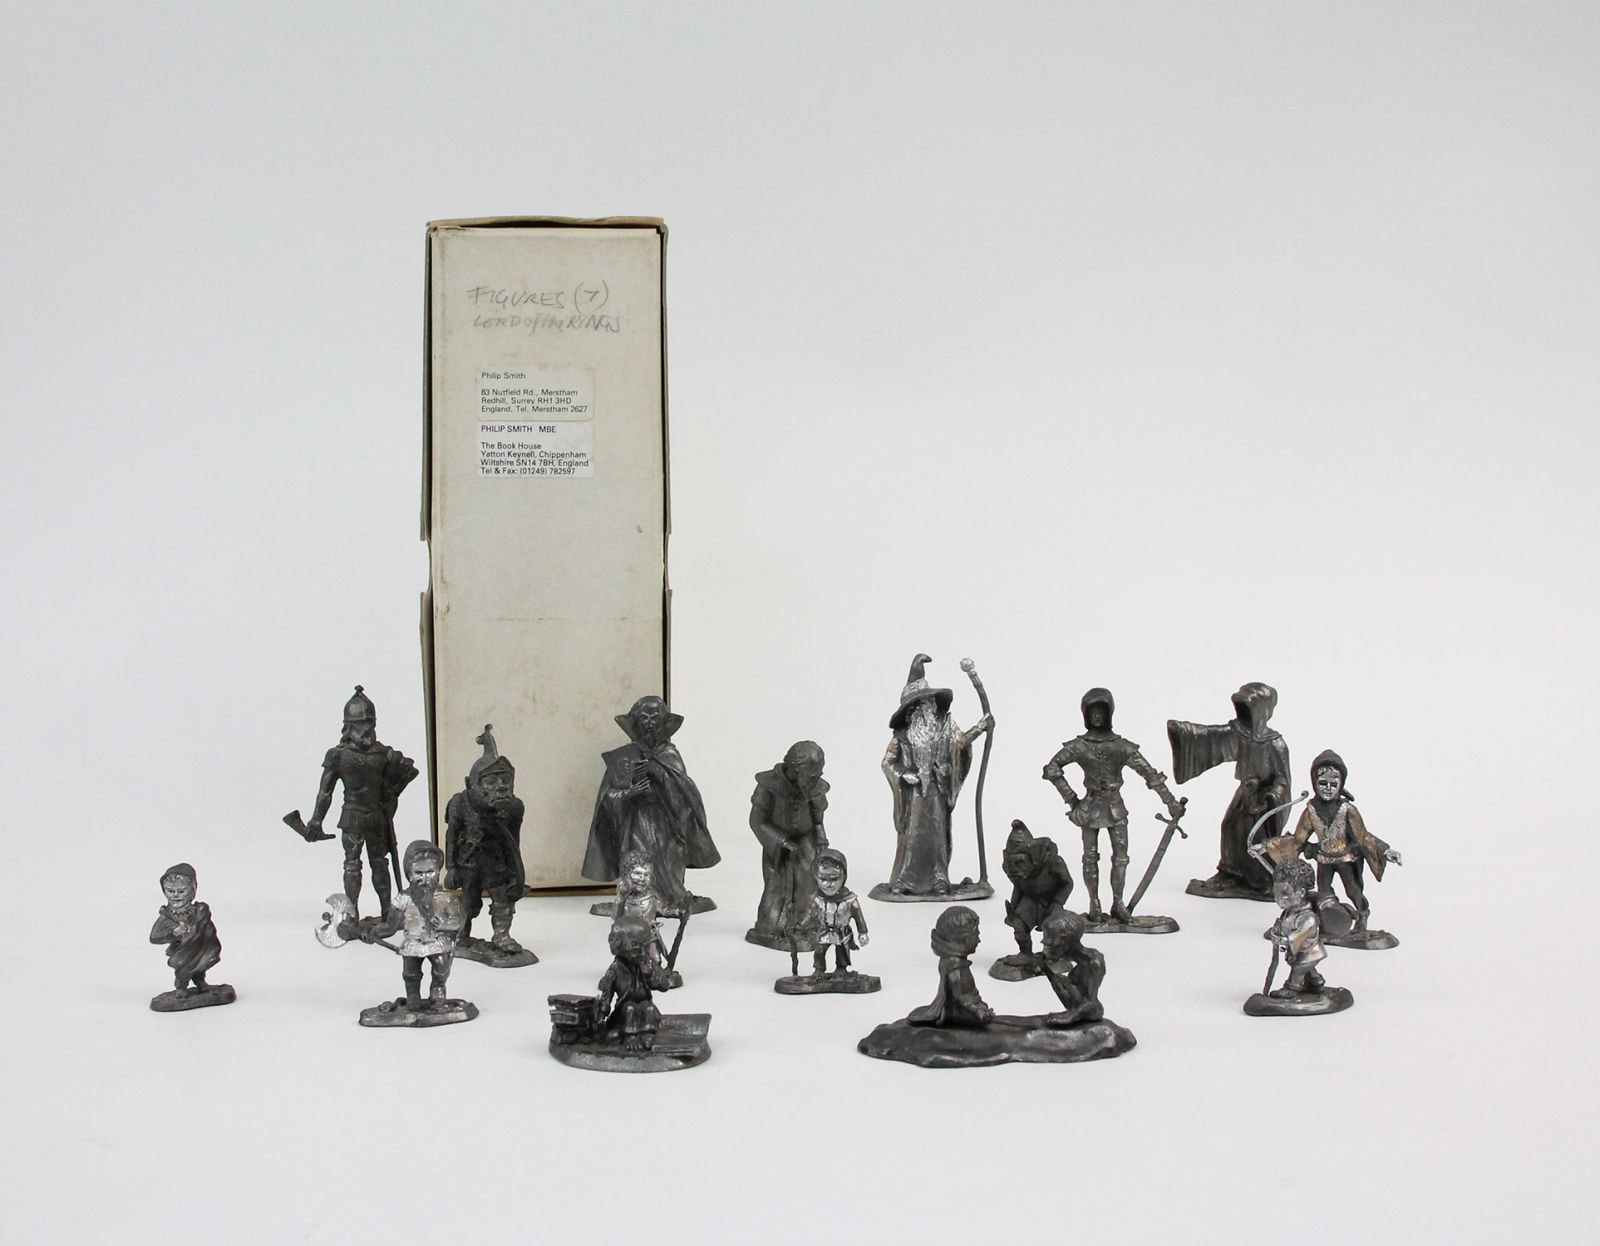 A GROUP OF 16 METAL FIGURES FOR DISPLAY WITH PHILIP SMITH'S LORD OF THE RINGS BOOK BINDINGS -  image 2